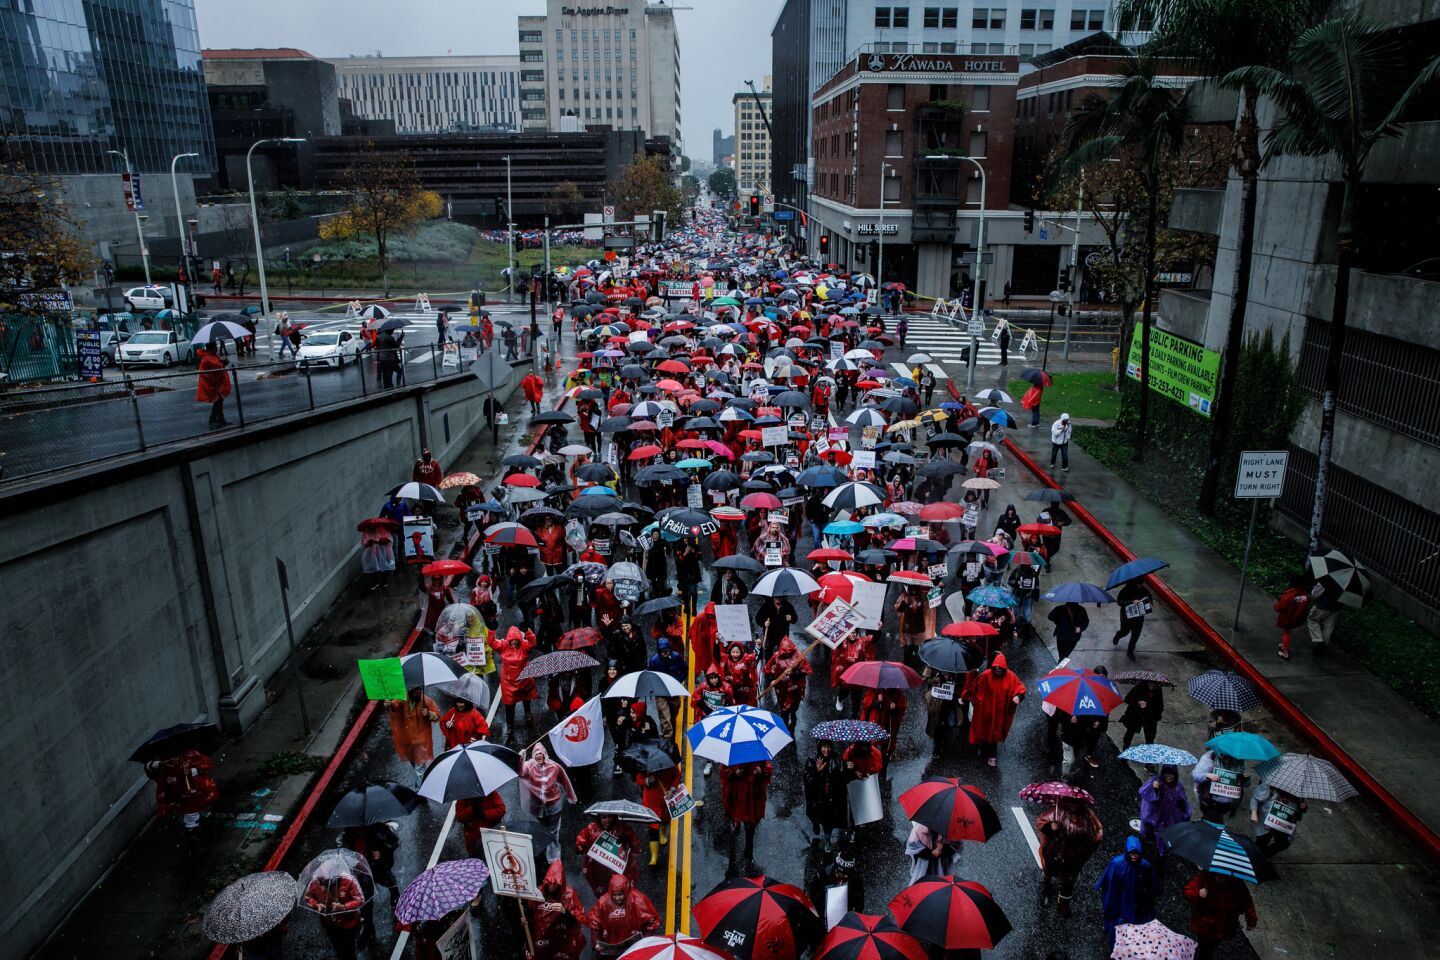 UTLA teachers marched from downtown Los Angeles to LAUSD headquarters Monday, January 14, 2019, as they walked off the job in their first strike in 30 years.